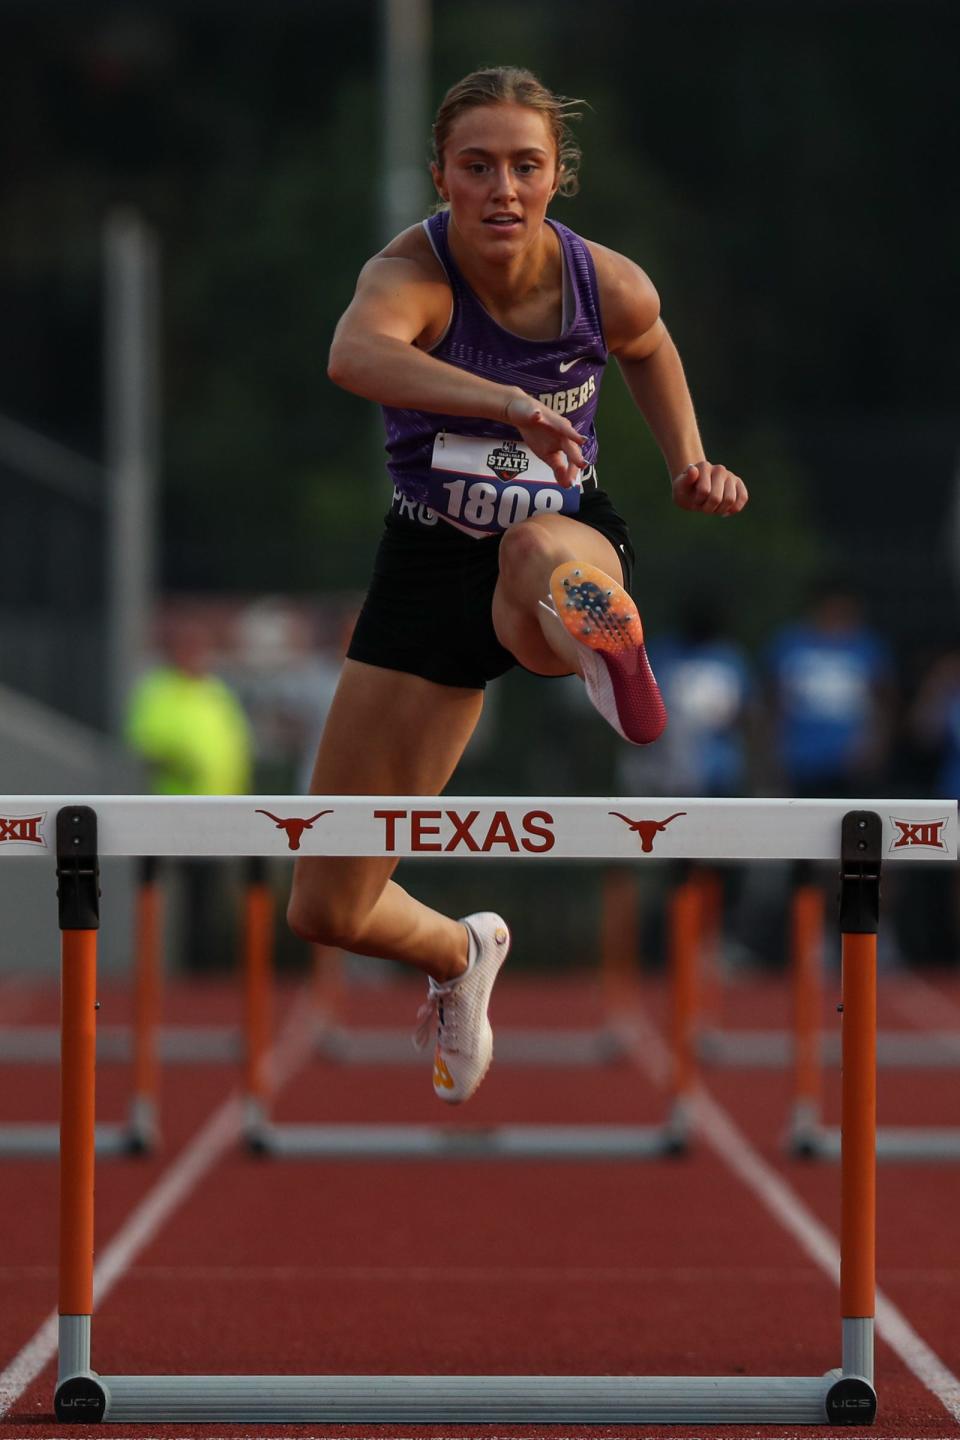 Merkel's Avery Holloway competes in the Class 3A 300-meter hurdles.